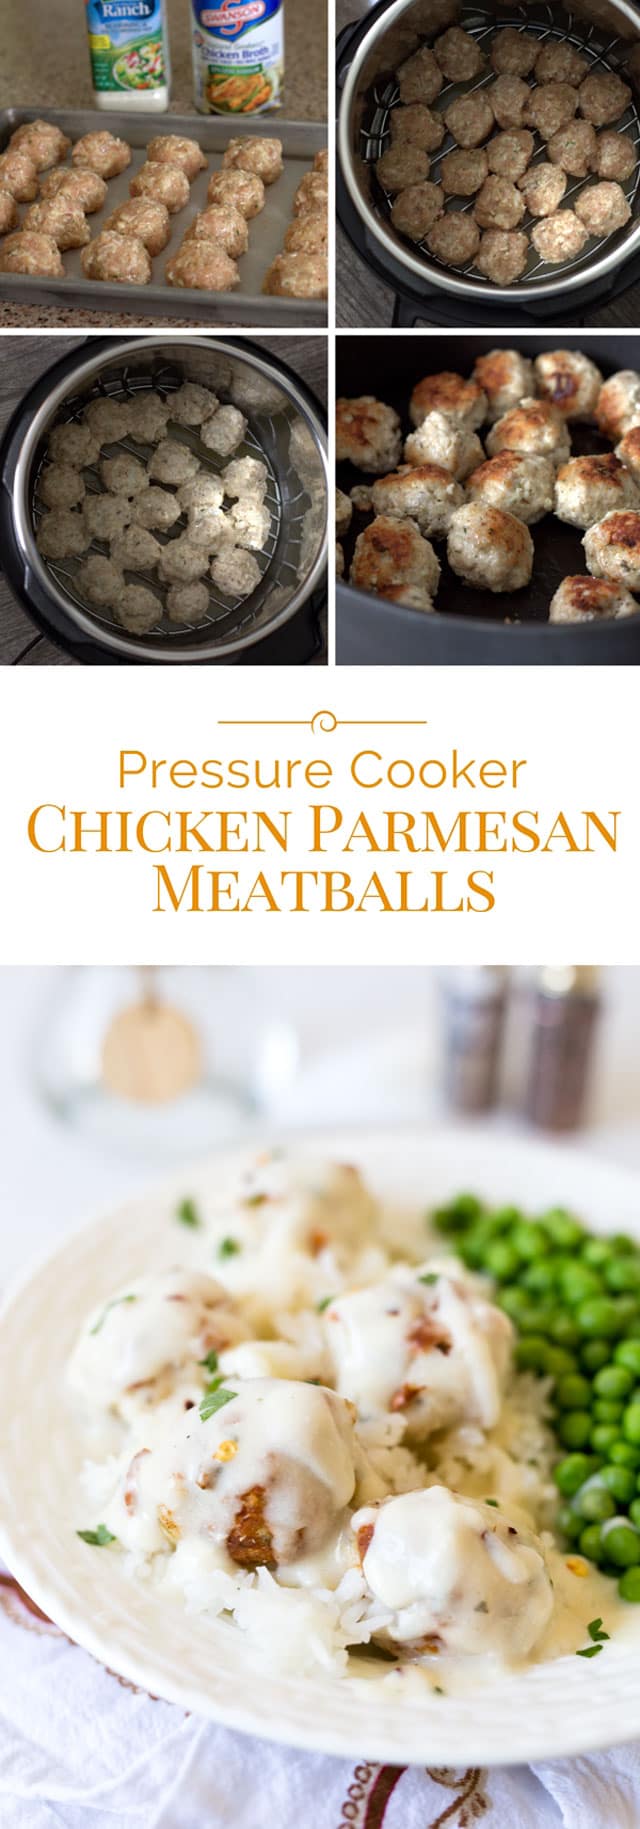 Chicken Parmesan meatballs in creamy ranch sauce is a quick and easy chicken meatballs recipe for your Instant Pot. Pressure cooker chicken Parmesan meatballs are packed with flavor and this cheesy meatballs dinner comes together in a snap. #instantpot #pressurecooker #Italianrecipes #chicken via @PressureCook2da